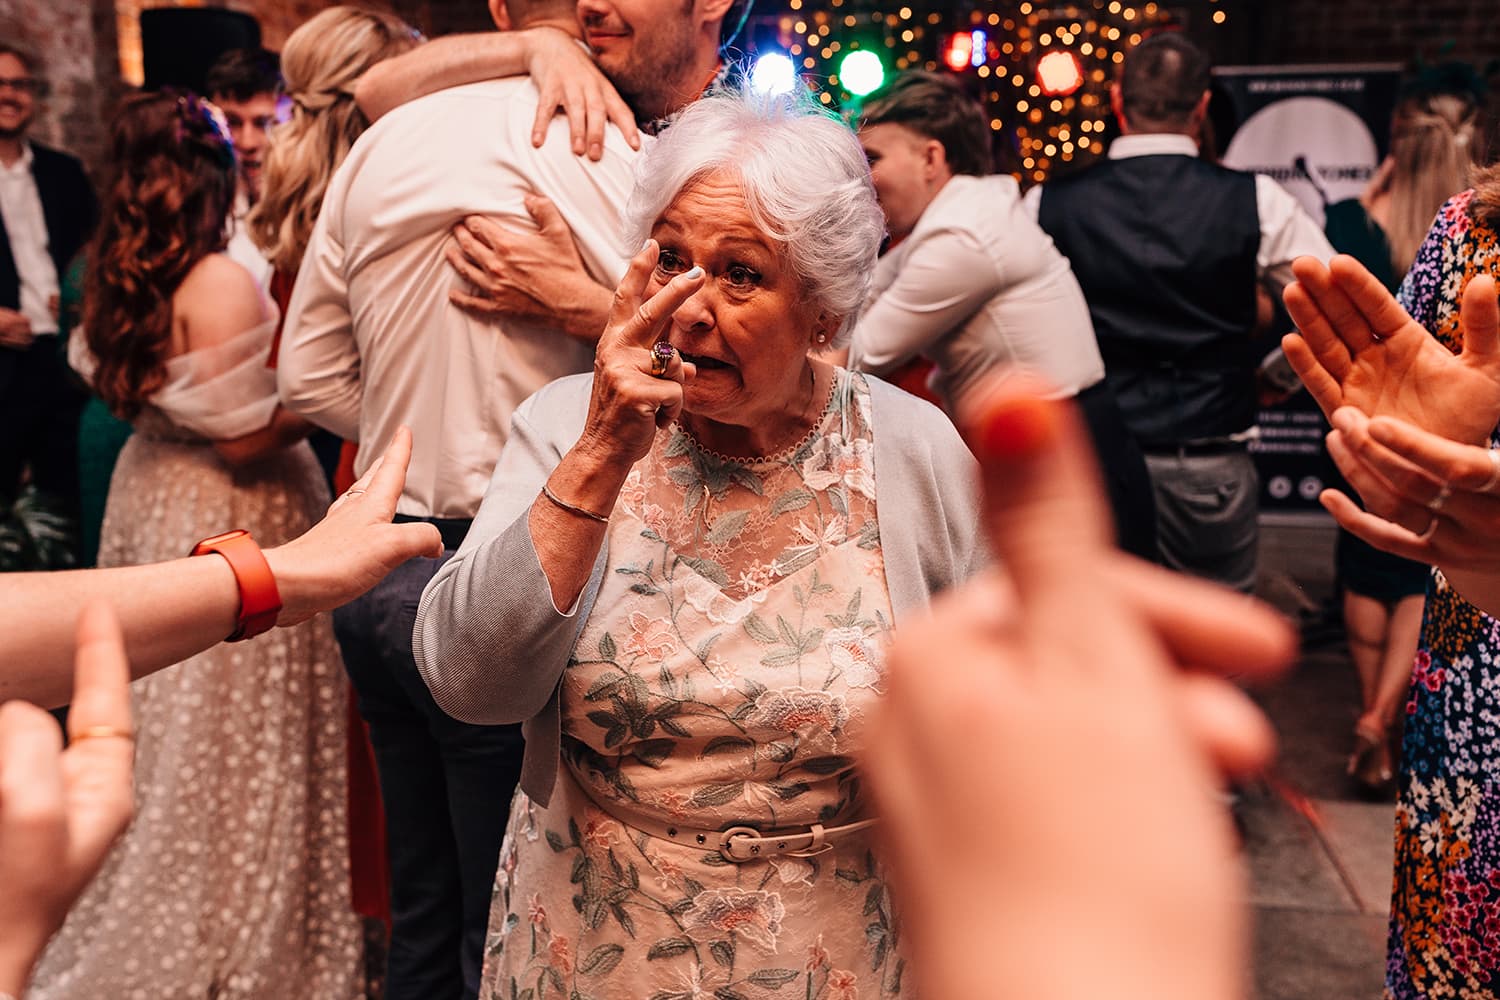 Fun wedding photograph of wedding guest partying